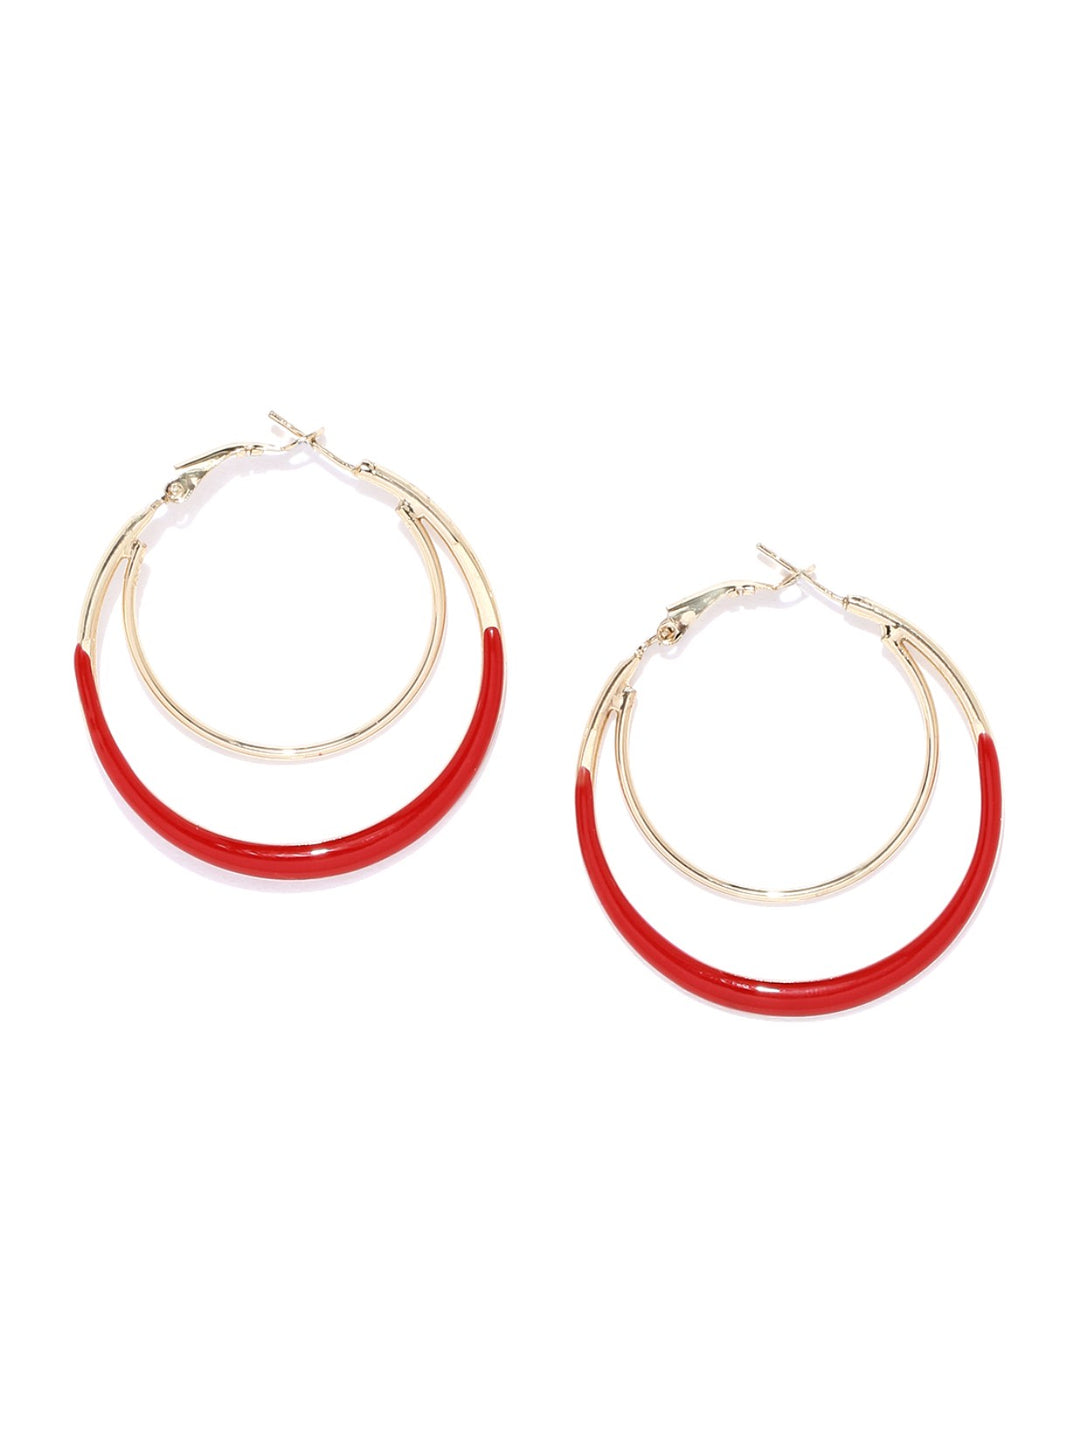 Designer Gold Plated Enamelled Red And Golden Dual Layer Stylish Fancy Party Wear Hoop Earrings For Women And Girls